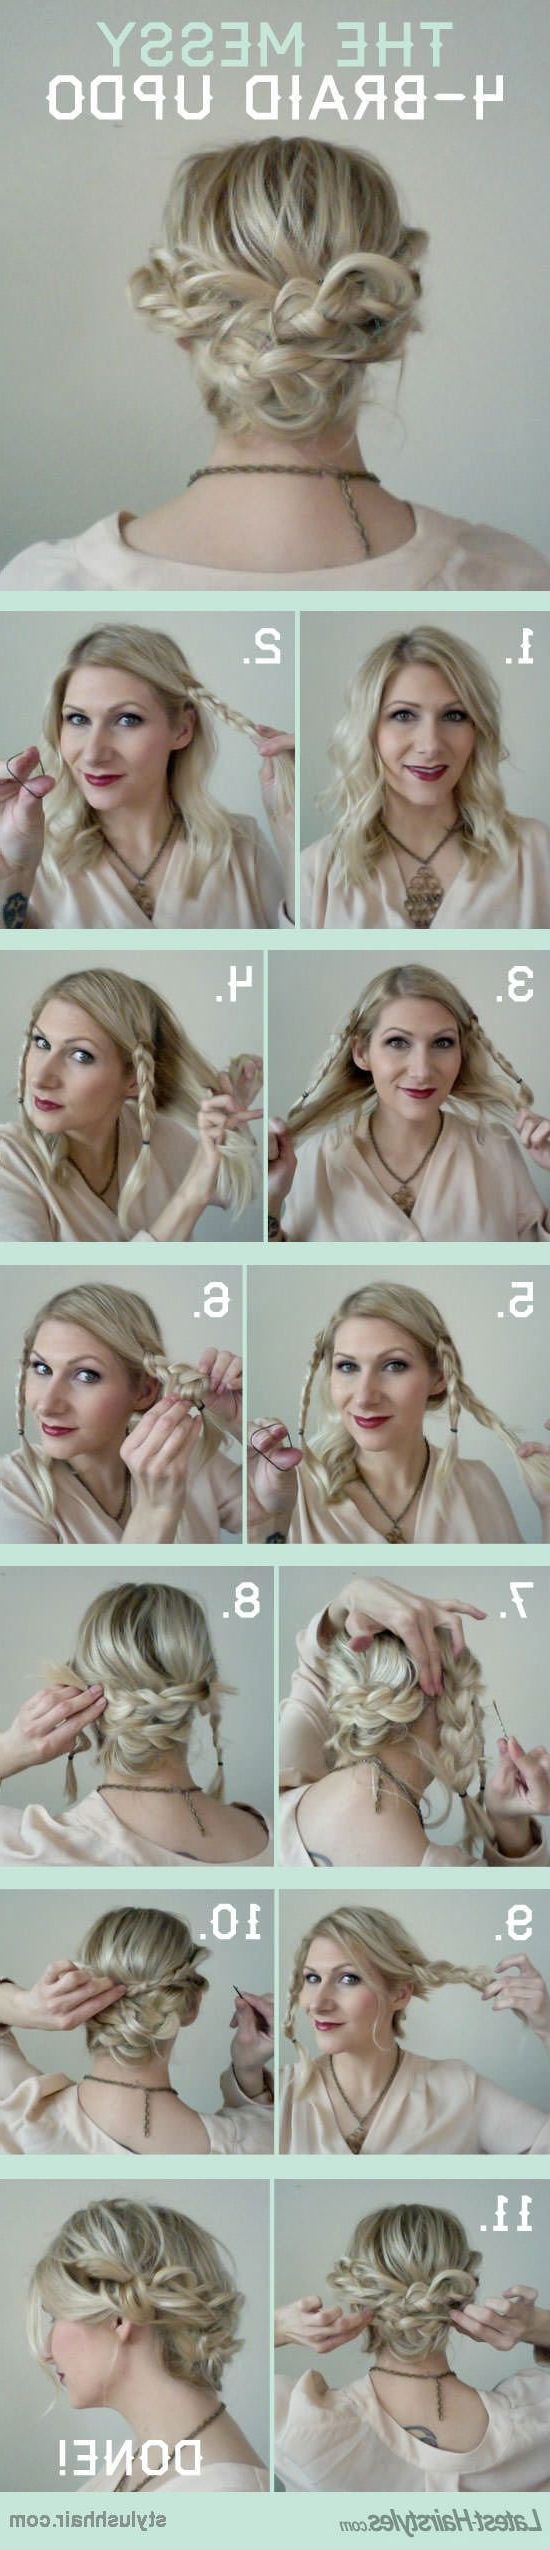 15 Cute And Easy Hairstyle Tutorials For Medium Length Hair – Gurl Inside Well Known Simple Wedding Hairstyles For Shoulder Length Hair (View 14 of 15)